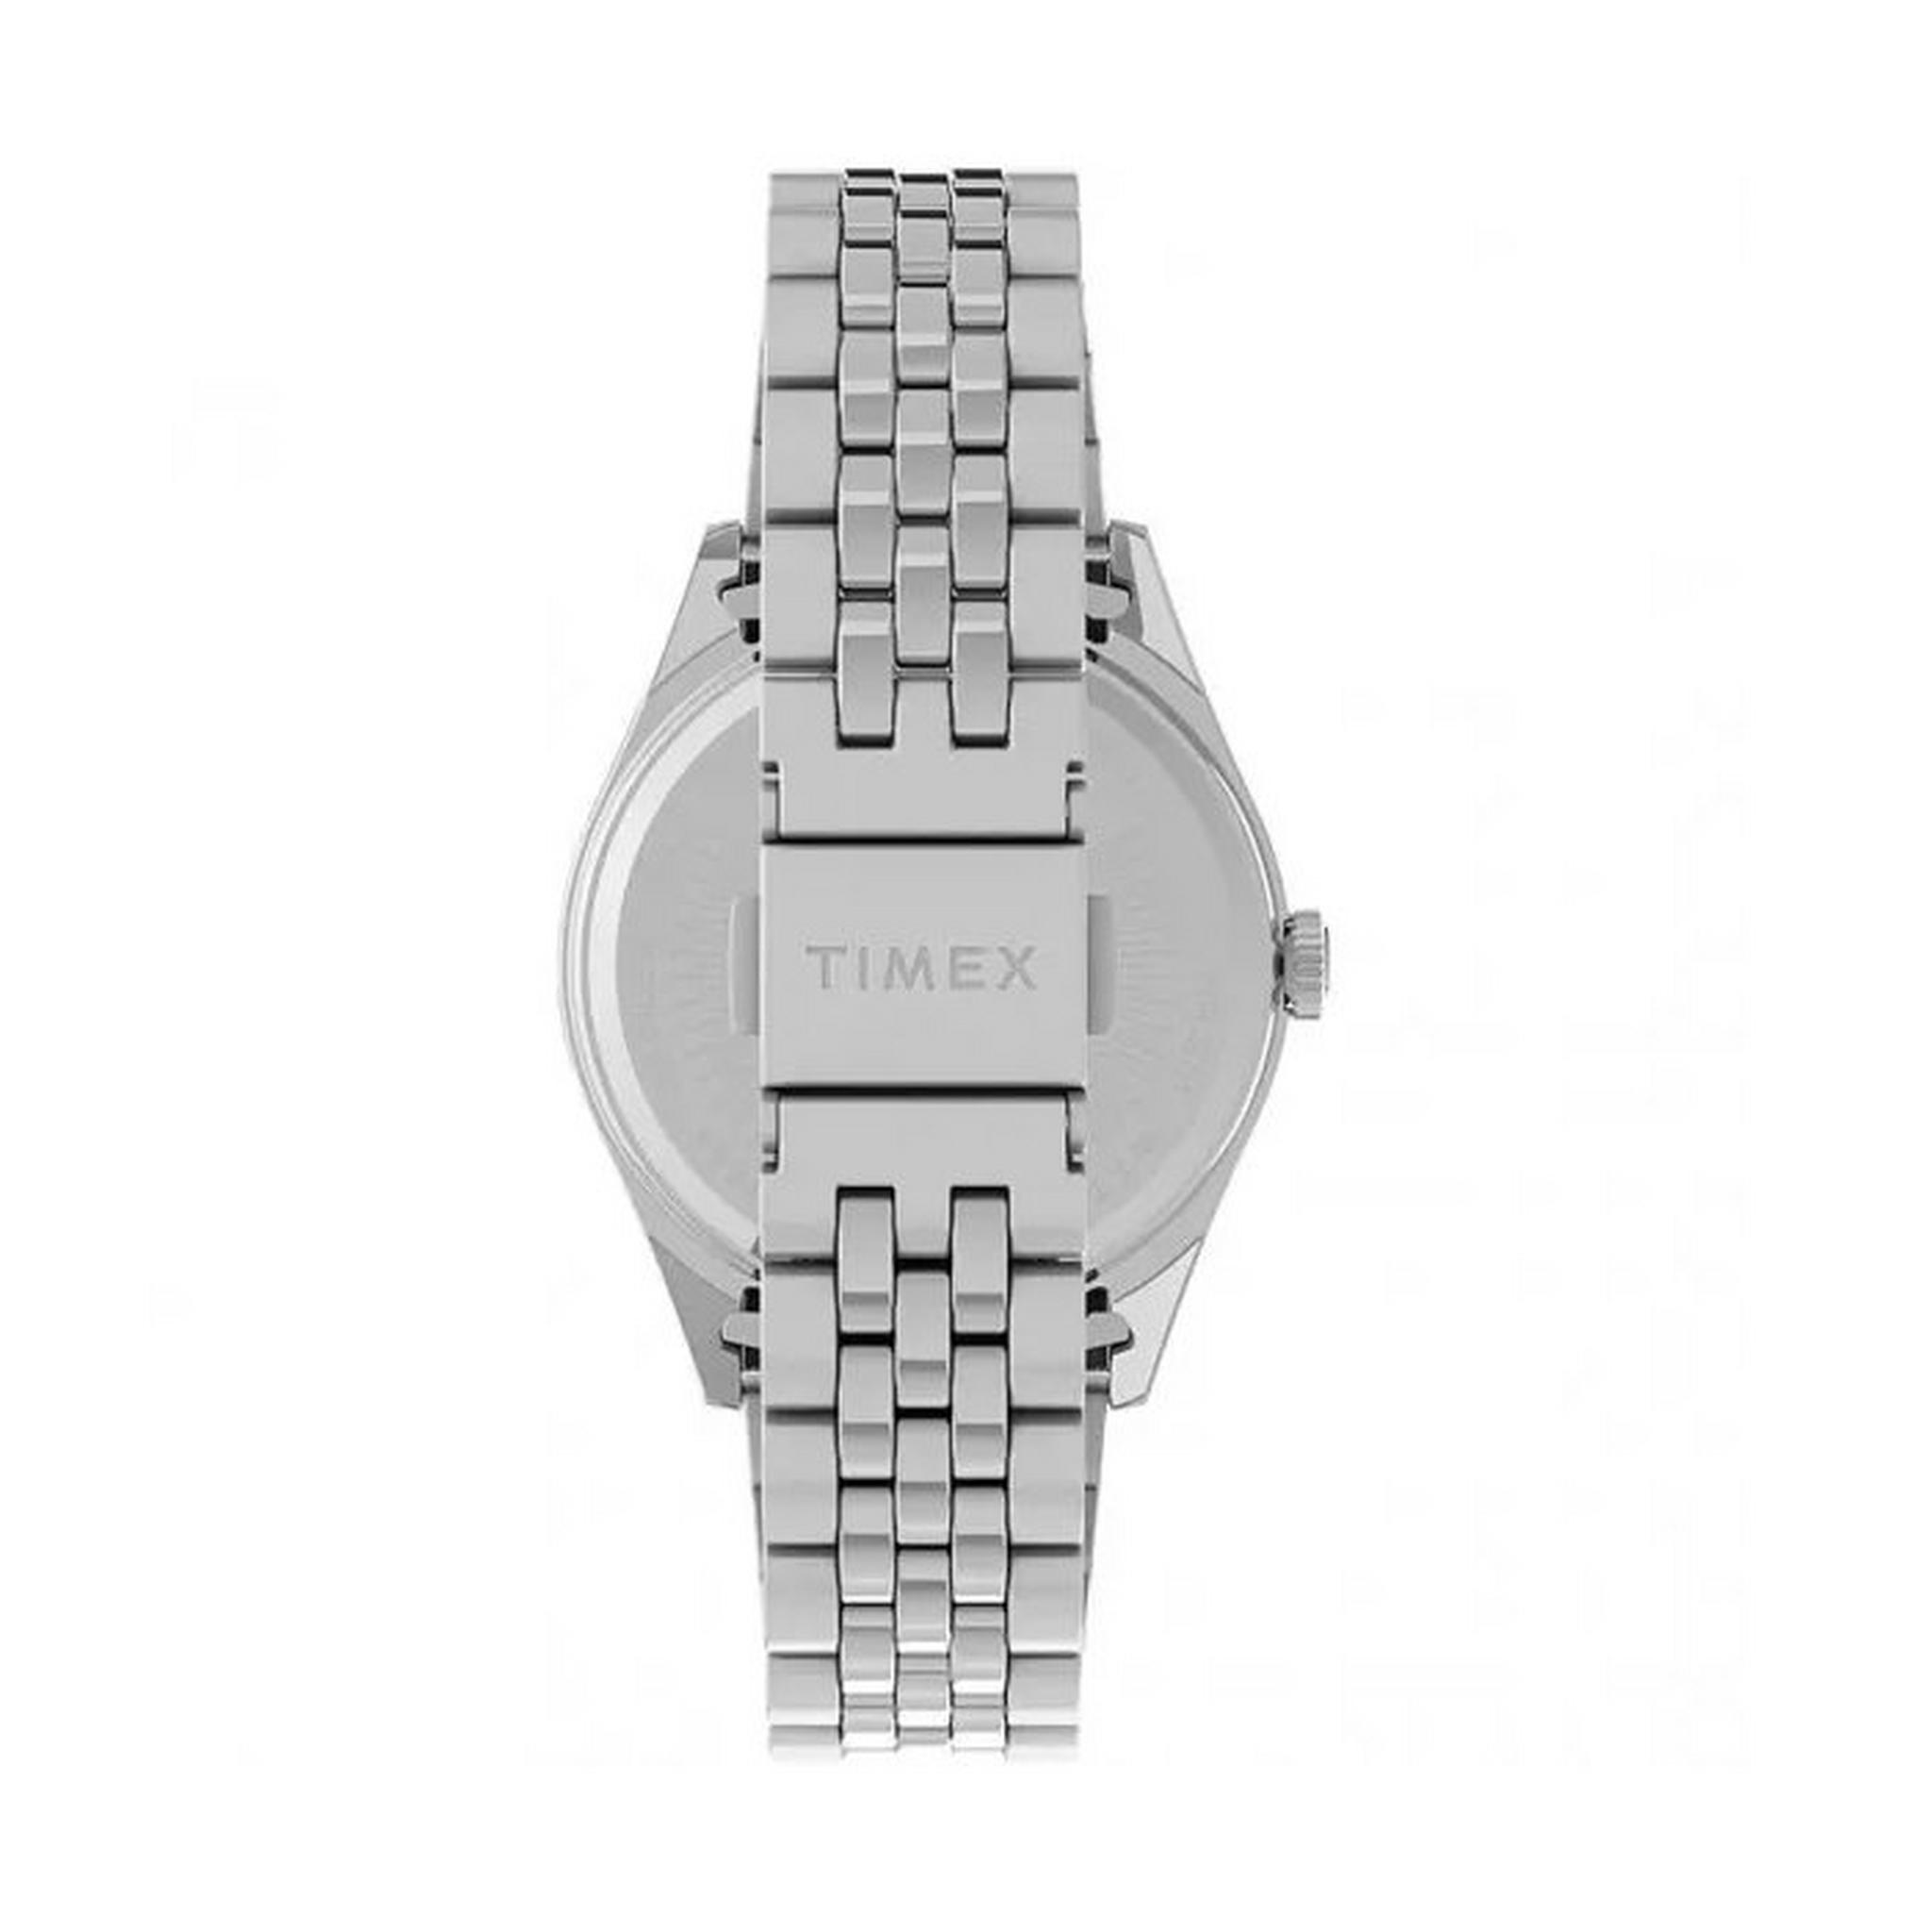 TIMEX Legacy Women's Watch, Analog, 36mm, Stainless Steel Strap, TW2V68400 – Silver